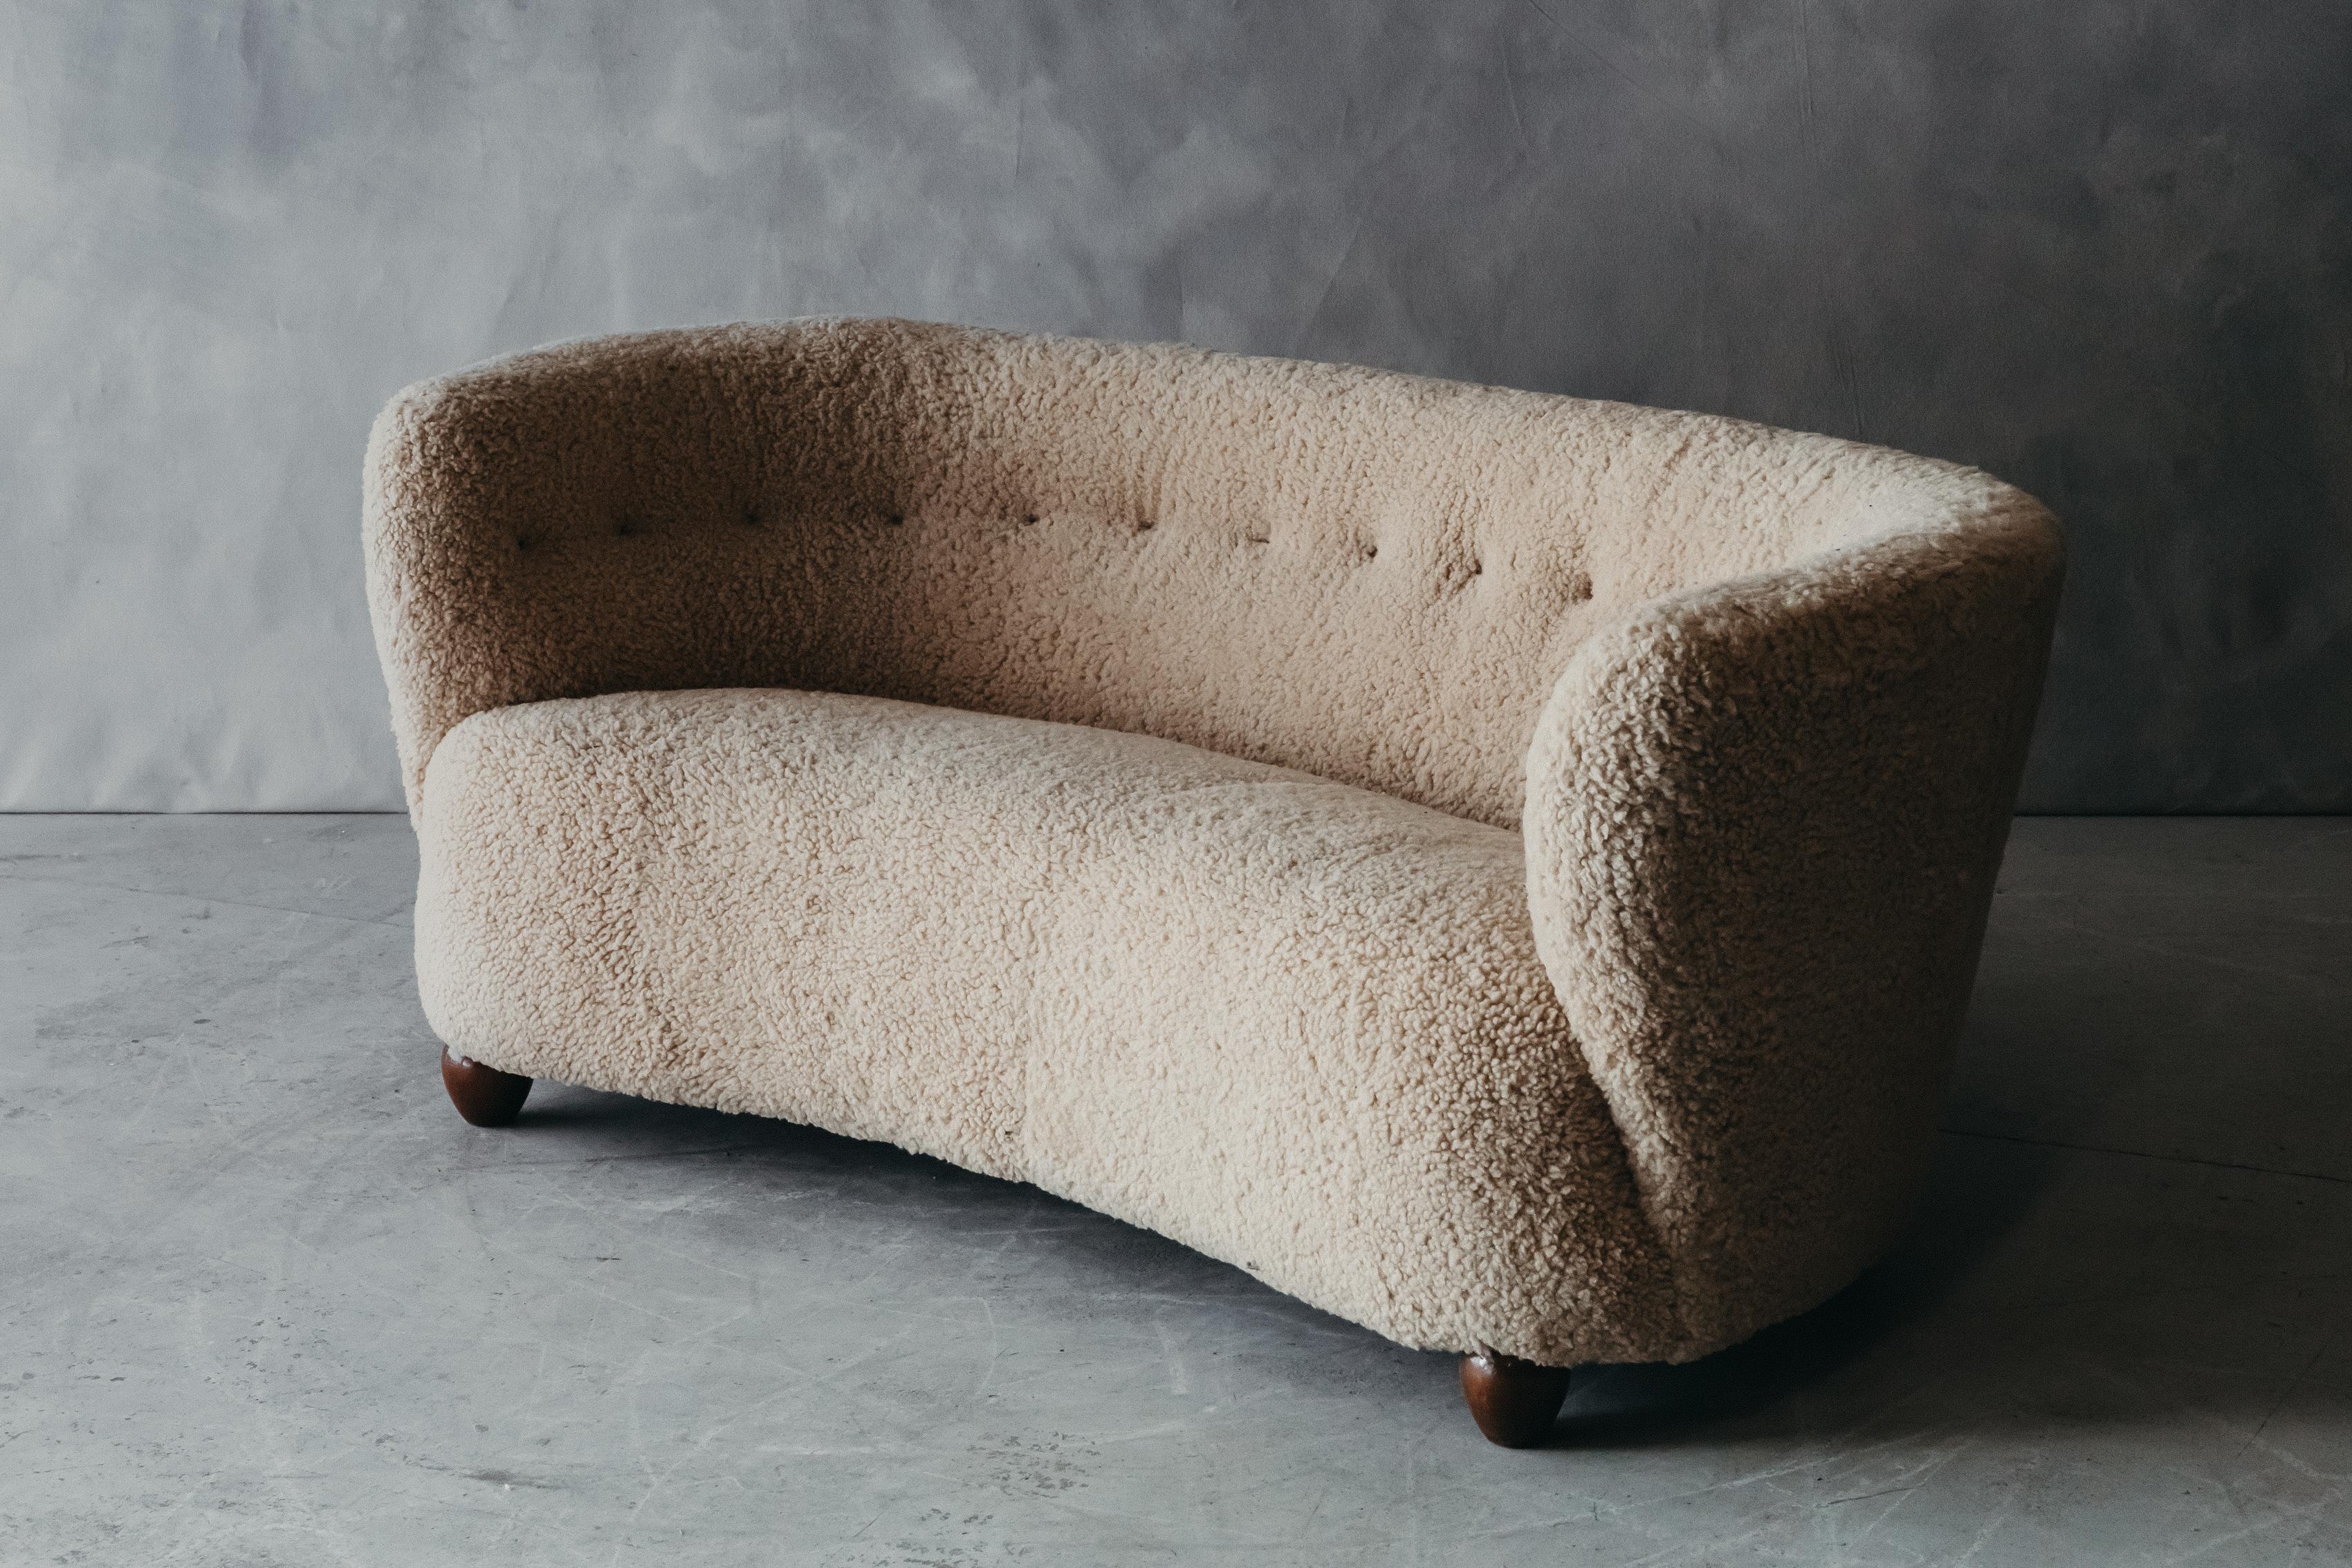 Vintage shearling cabinetmaker sofa from Denmark, circa 1950. Late upholstered in Denmark with premium shearling. Excellent condition.

We don't have the time to write an extensive description on each of our pieces. We prefer to speak directly with